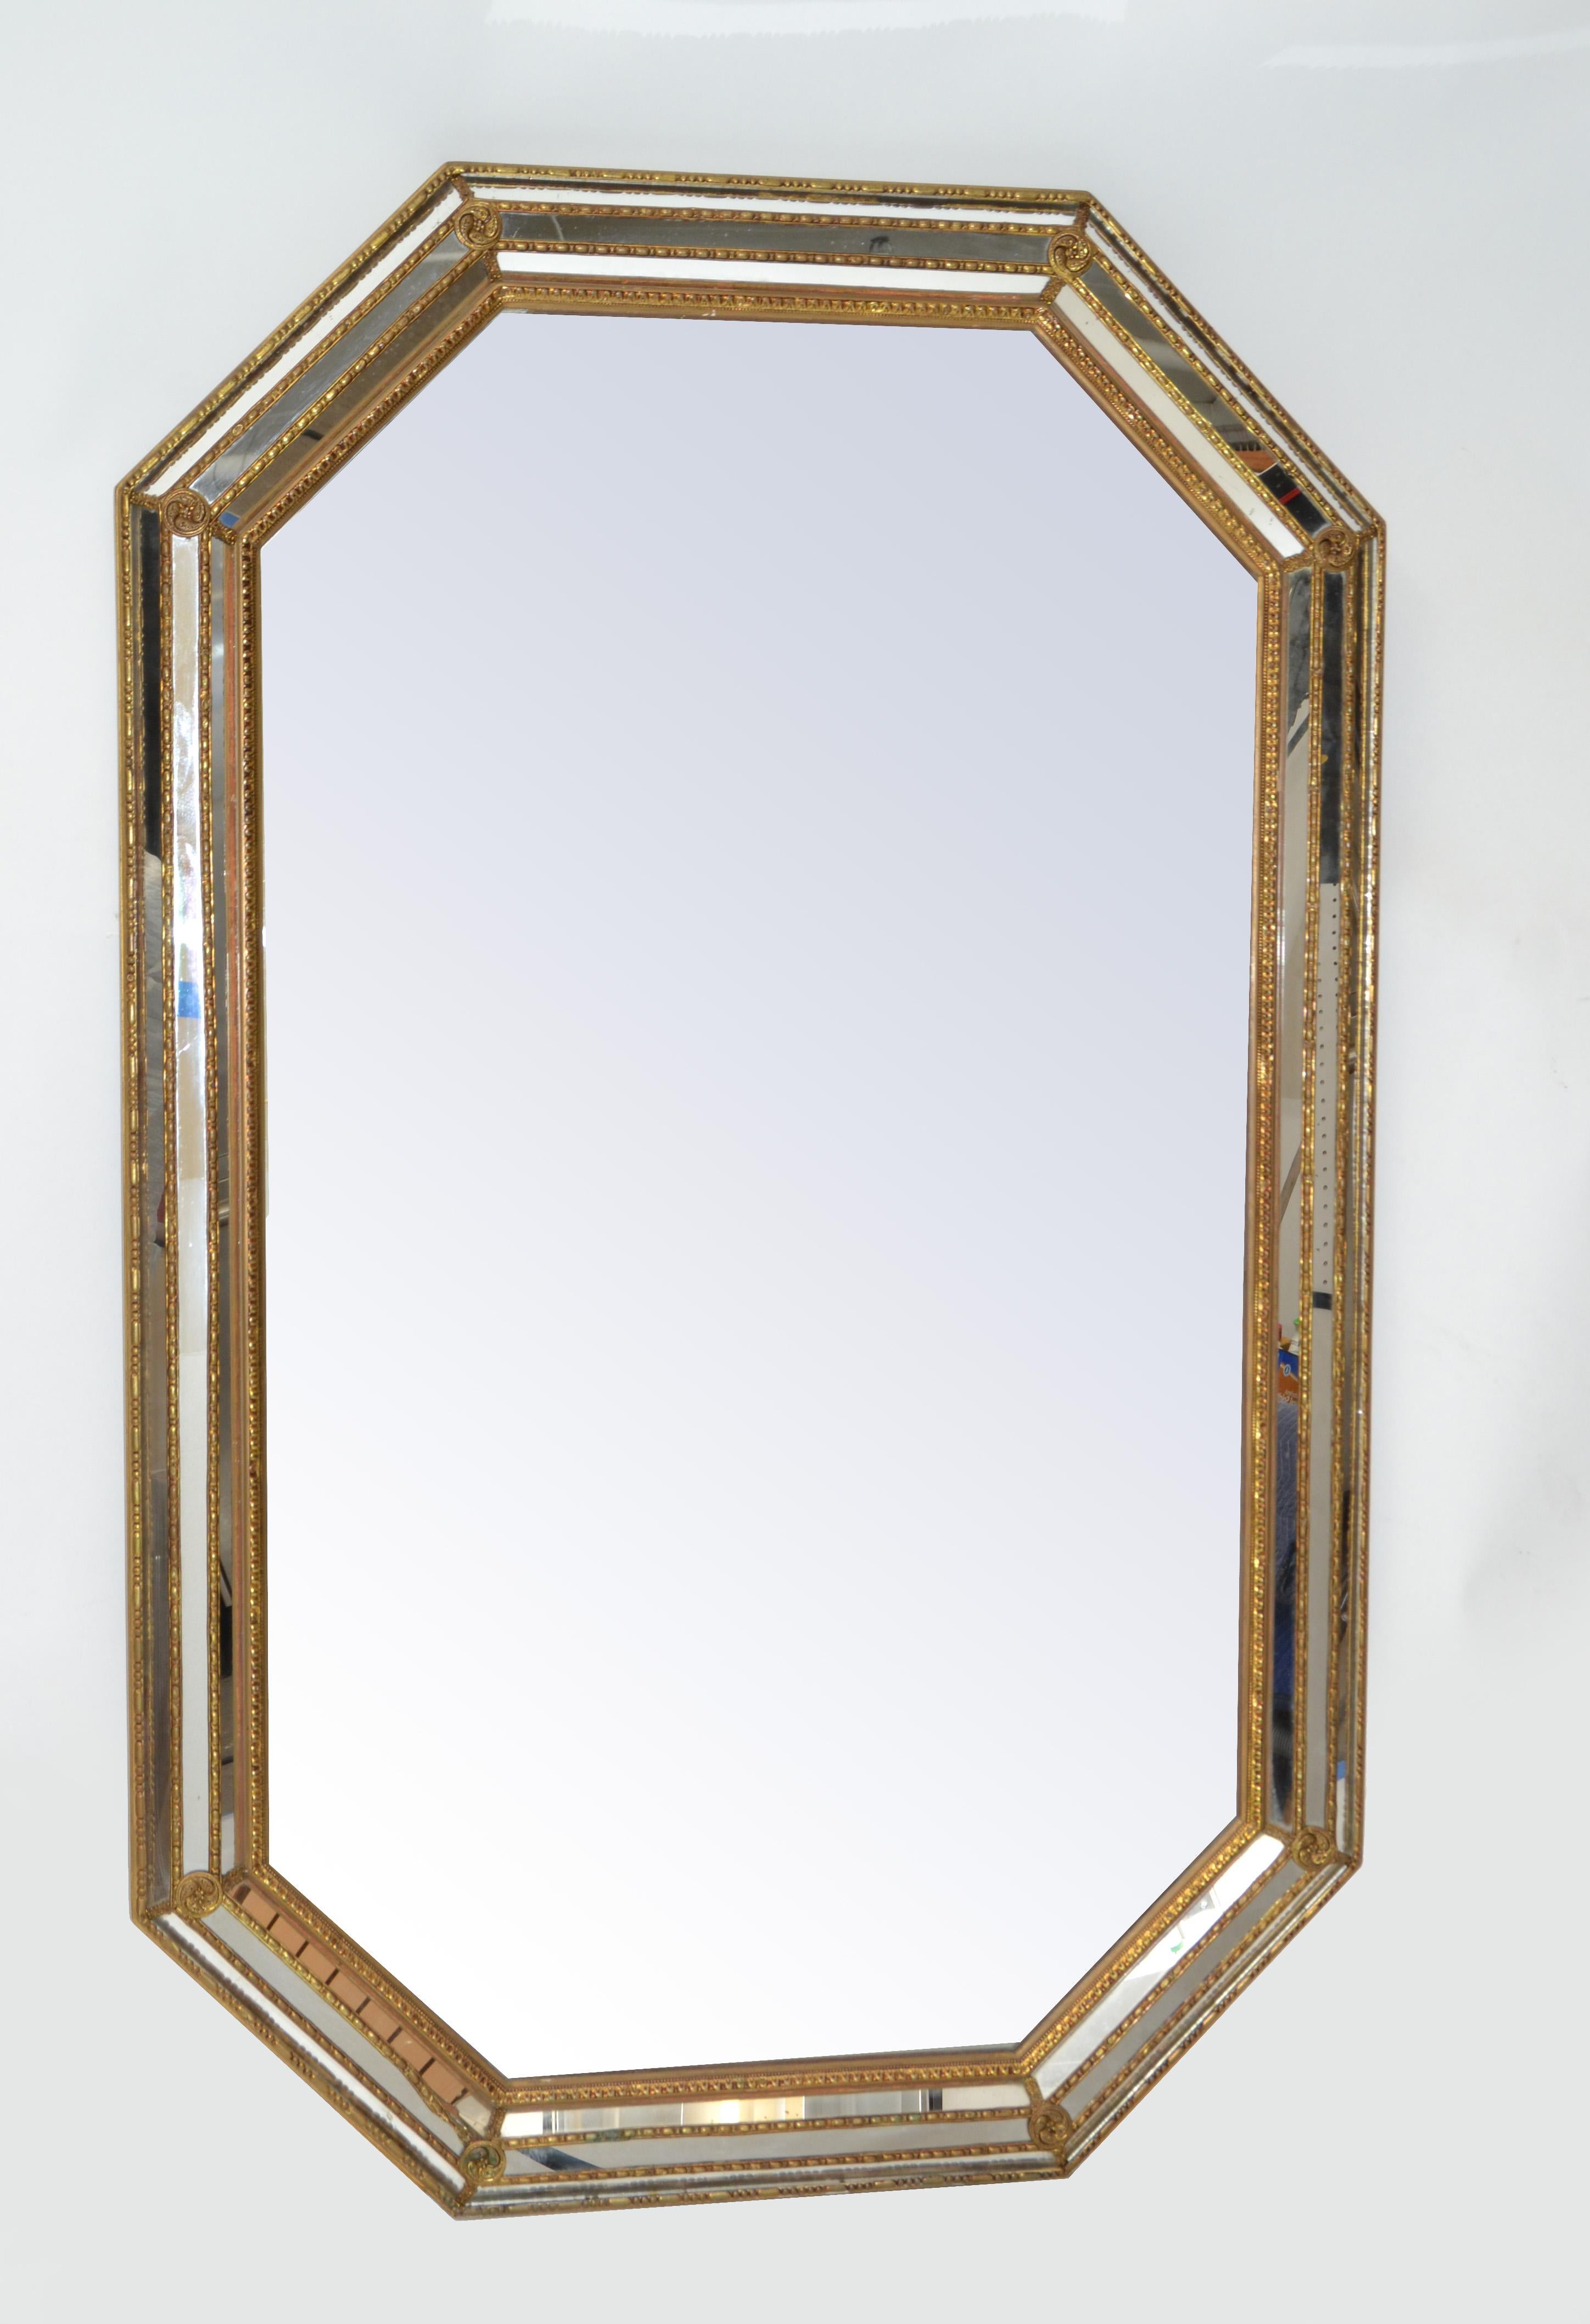 Venetian circa 1930 gilt wood wall mirror with Bohemian brass flowers and ornaments.
Can be hung vertical.
In all original condition with a clean break at the base, otherwise normal light wear.